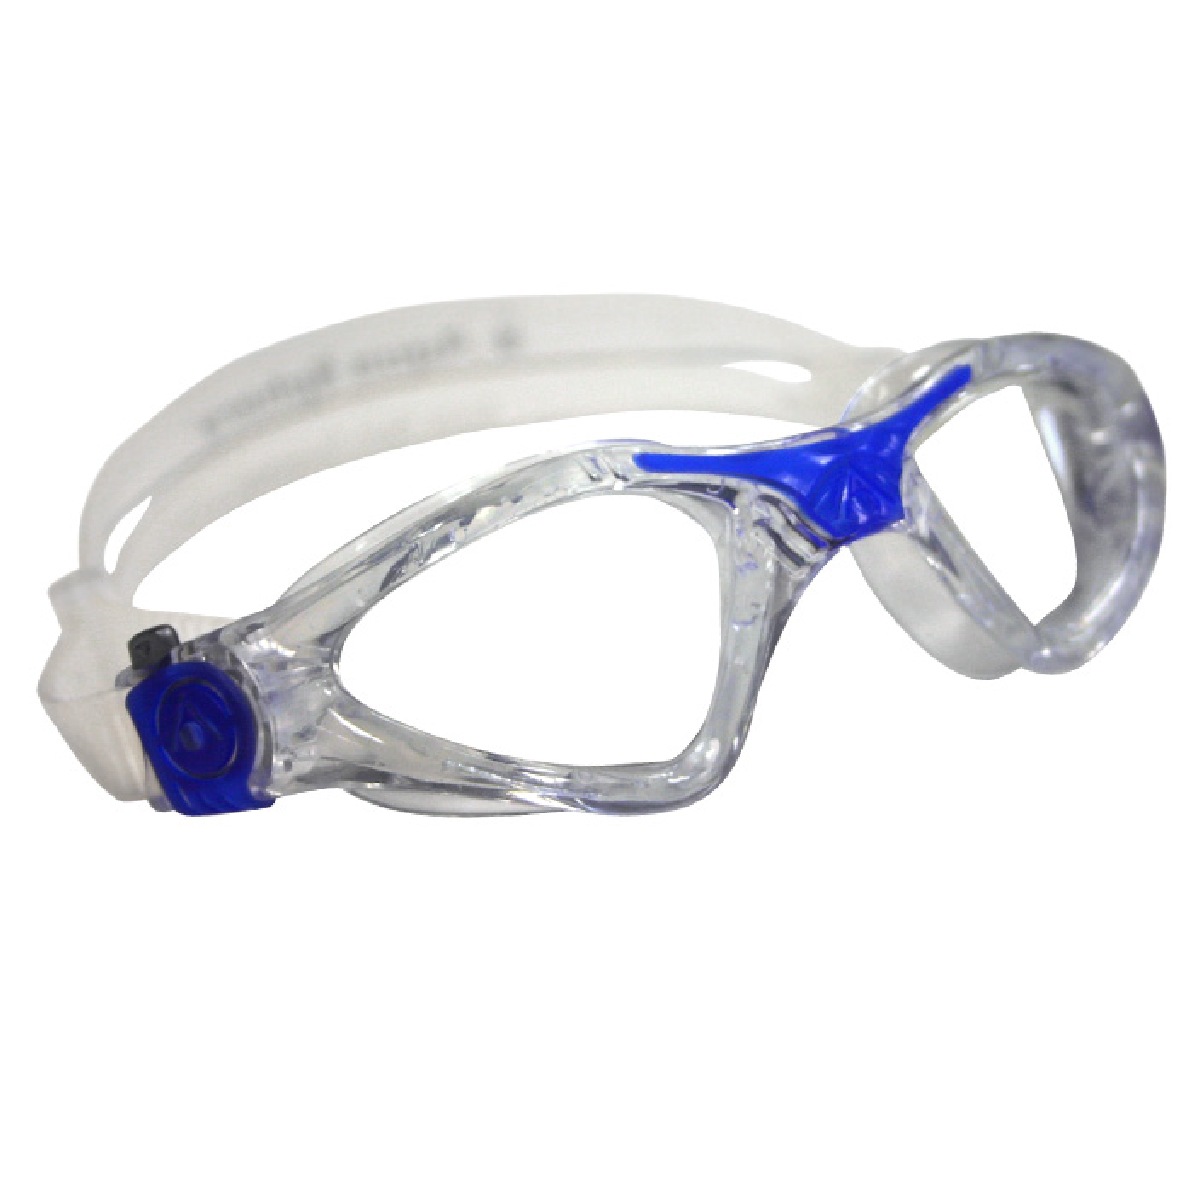 AQUASPHERE KAYENNE GOGGLES - CLEAR/BLUE - CLEAR LENS SMALL FIT